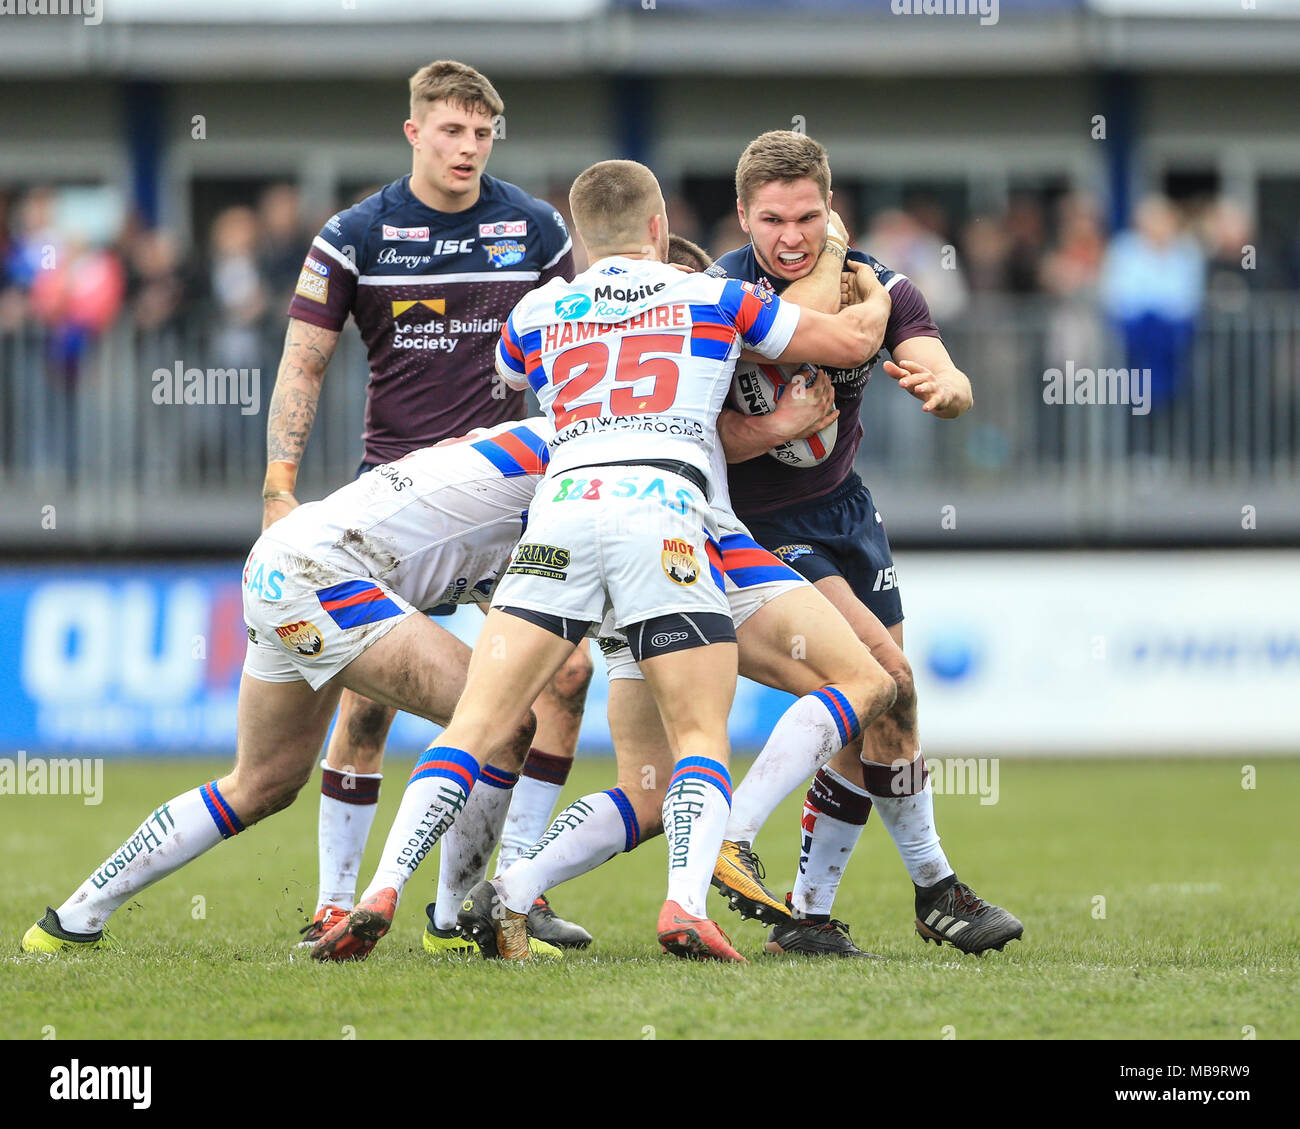 Wakefield, UK. 8th April 2018, Beaumont Legal Stadium, Wakefield, England; Betfred Super League rugby, Wakefield Trinity v Leeds Rhinos; Matt Parcell of Leeds Rhinos is tackled by Ryan Hampshire of Wakefield Trinity Credit: News Images/Alamy Live News Stock Photo